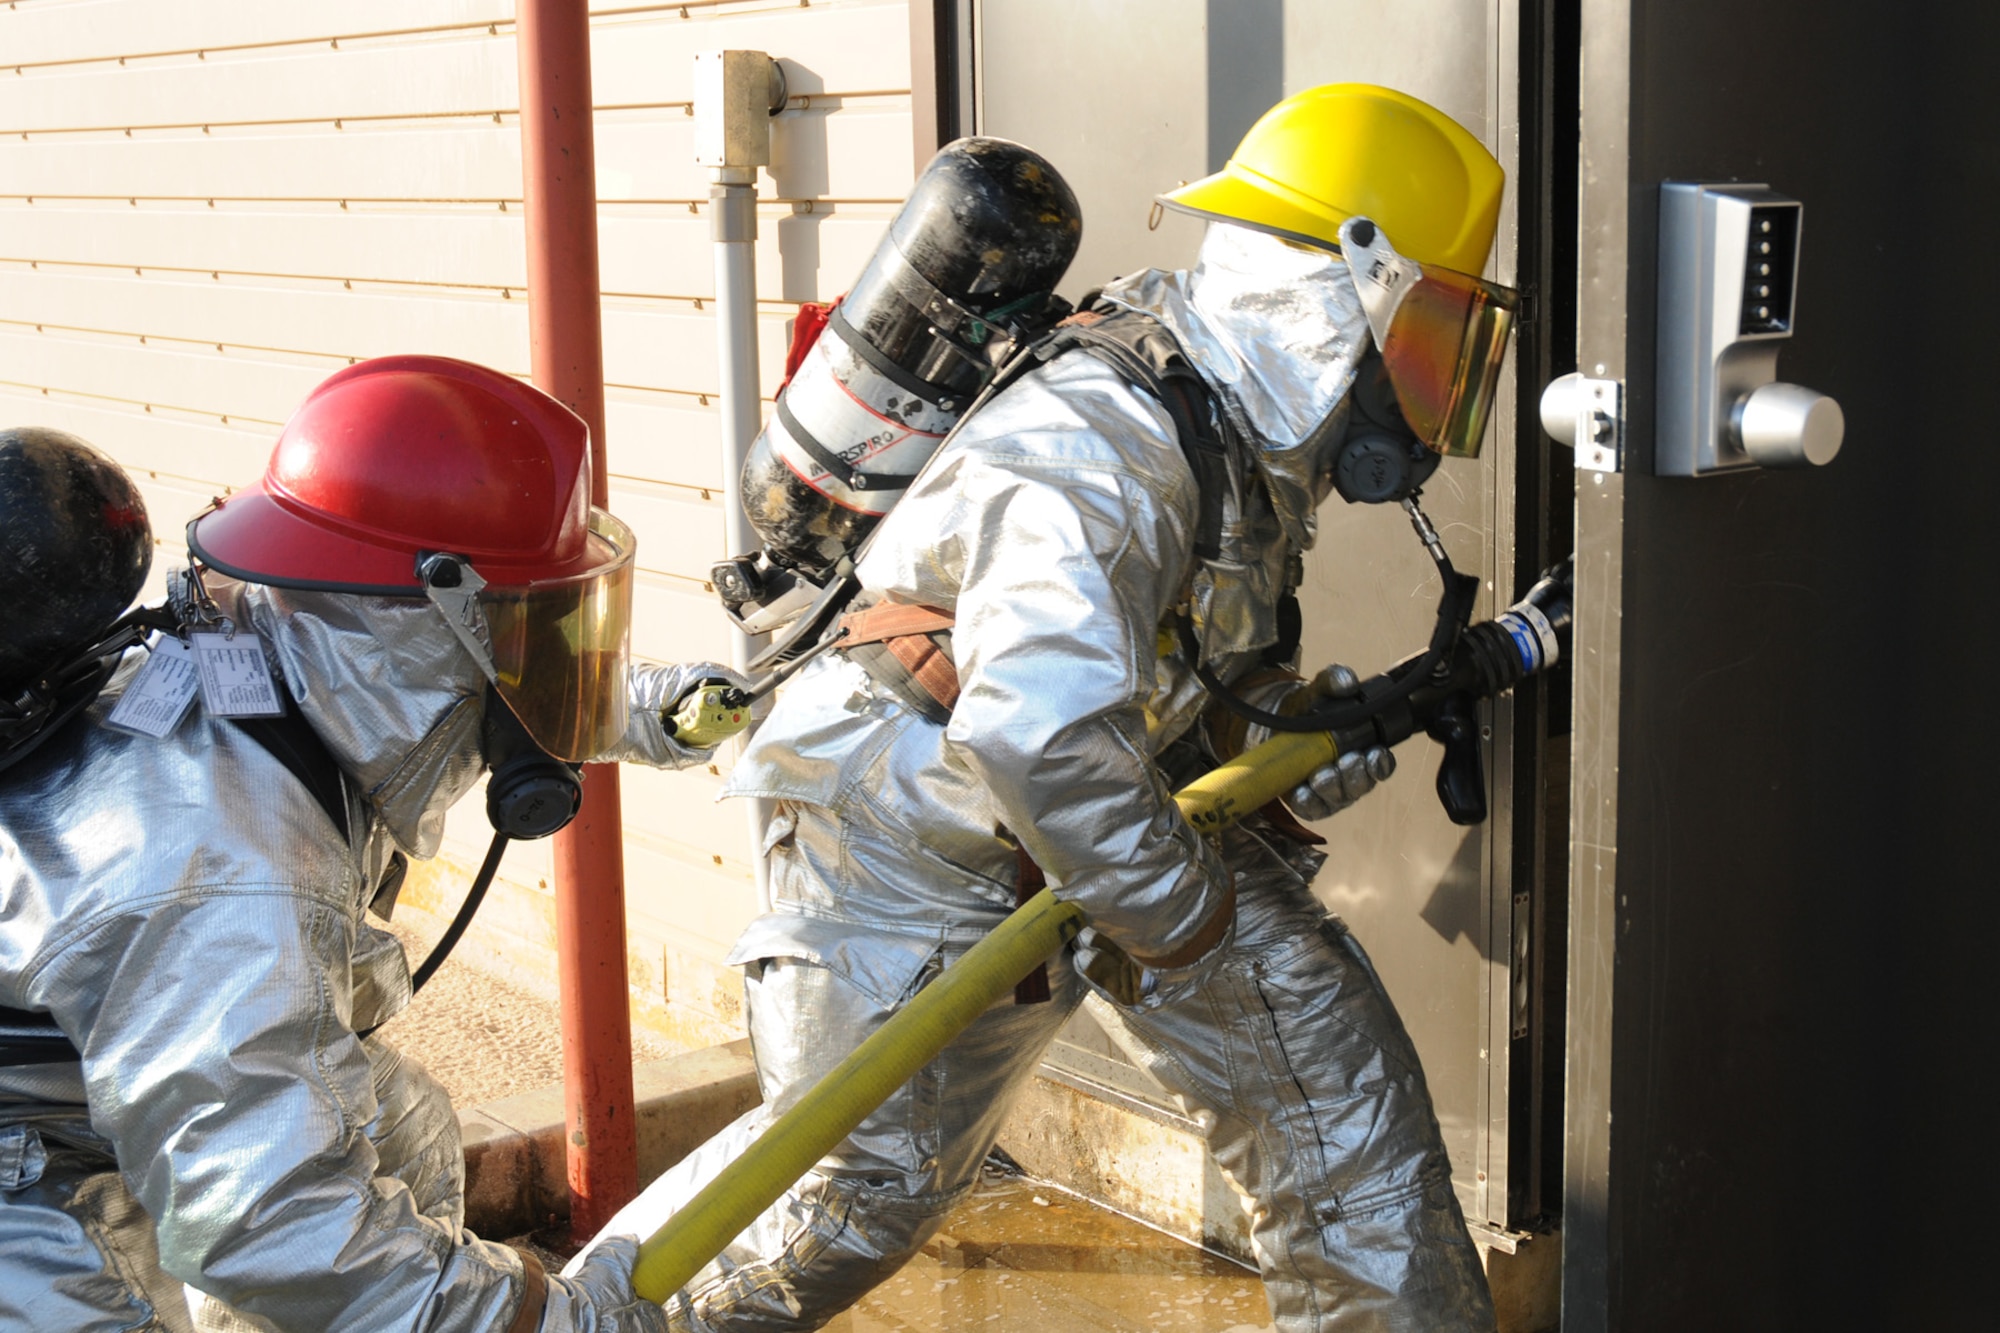 Airman 1st Class Vincent Kinard (front) and Staff Sgt. John Garcia, 18th Civil Engineering Squadron Fire Department, enter a building during a simulated kitchen fire scenario at the Silver Flag Training Facility Dec. 2 at Kadena Air Base. The 18th Wing is participating in a Local Operational Readiness Exercise to test the readiness of Kadena Airmen. (U.S. Air Force photo/Airman 1st Class Amanda Grabiec)